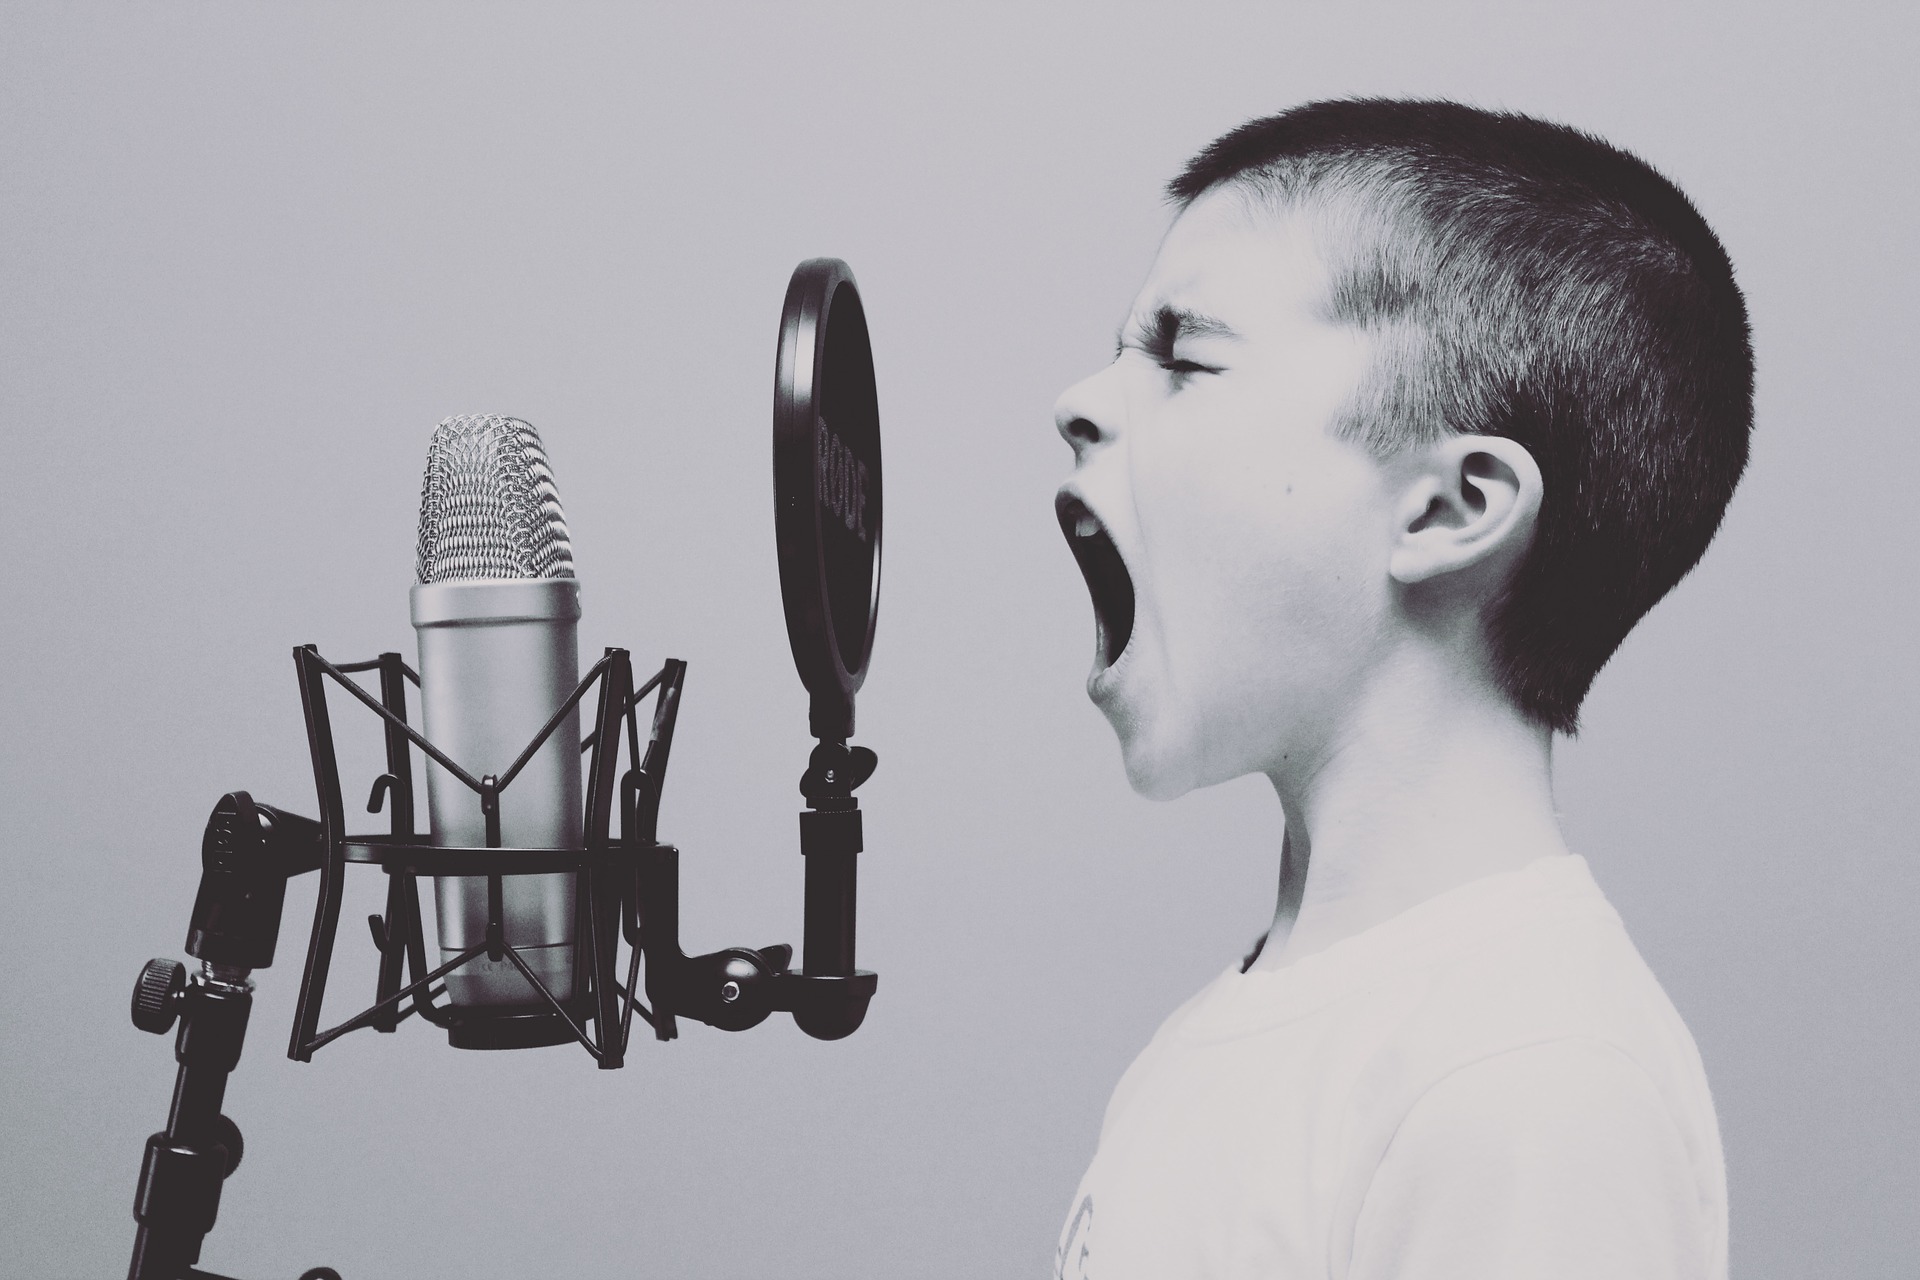 Image is black and white with a boy's profle screaming into a microphone